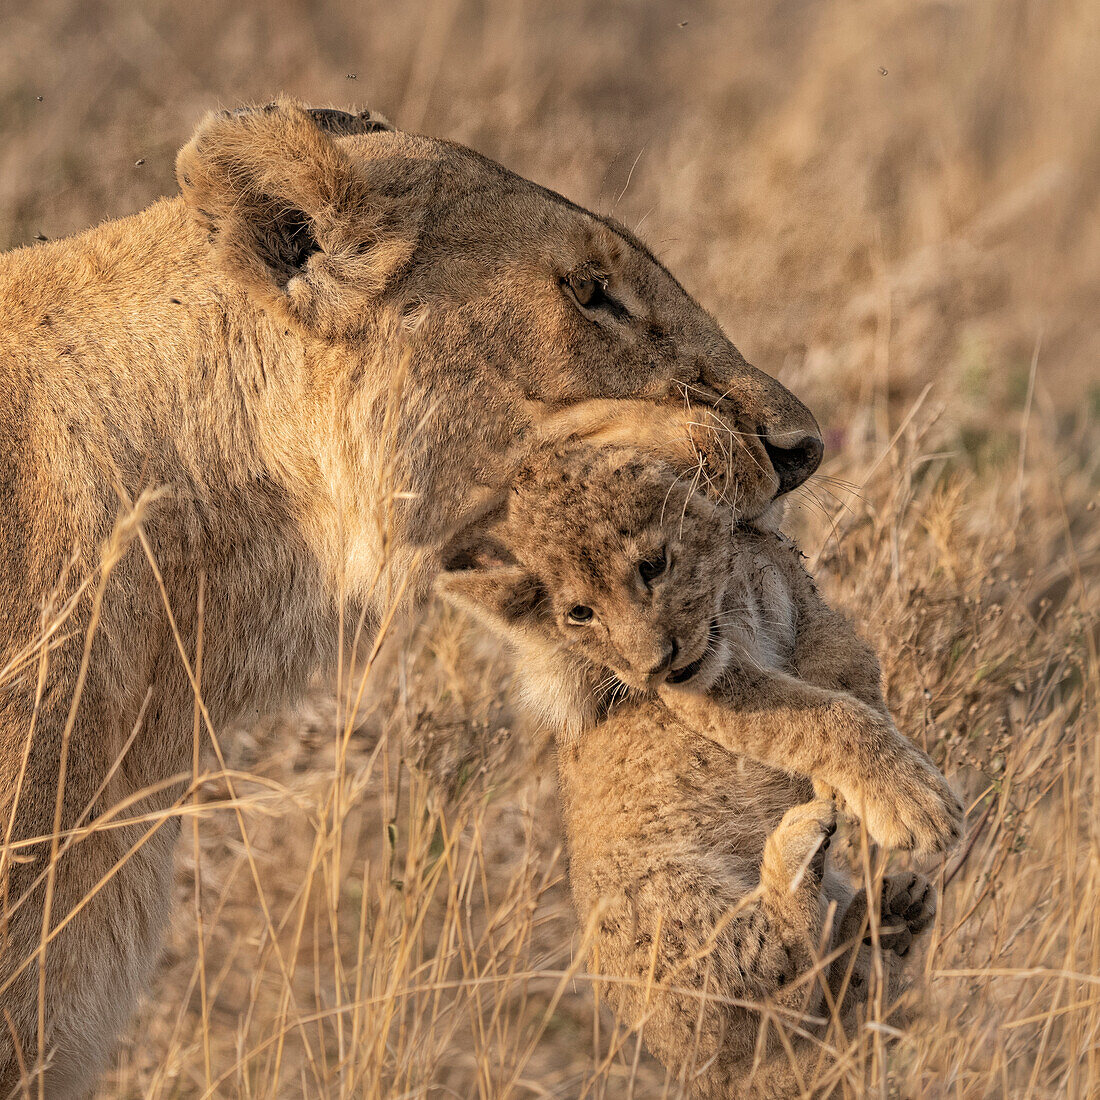 Female lion carrying a baby cub in her mouth, Serengeti, Tanzania